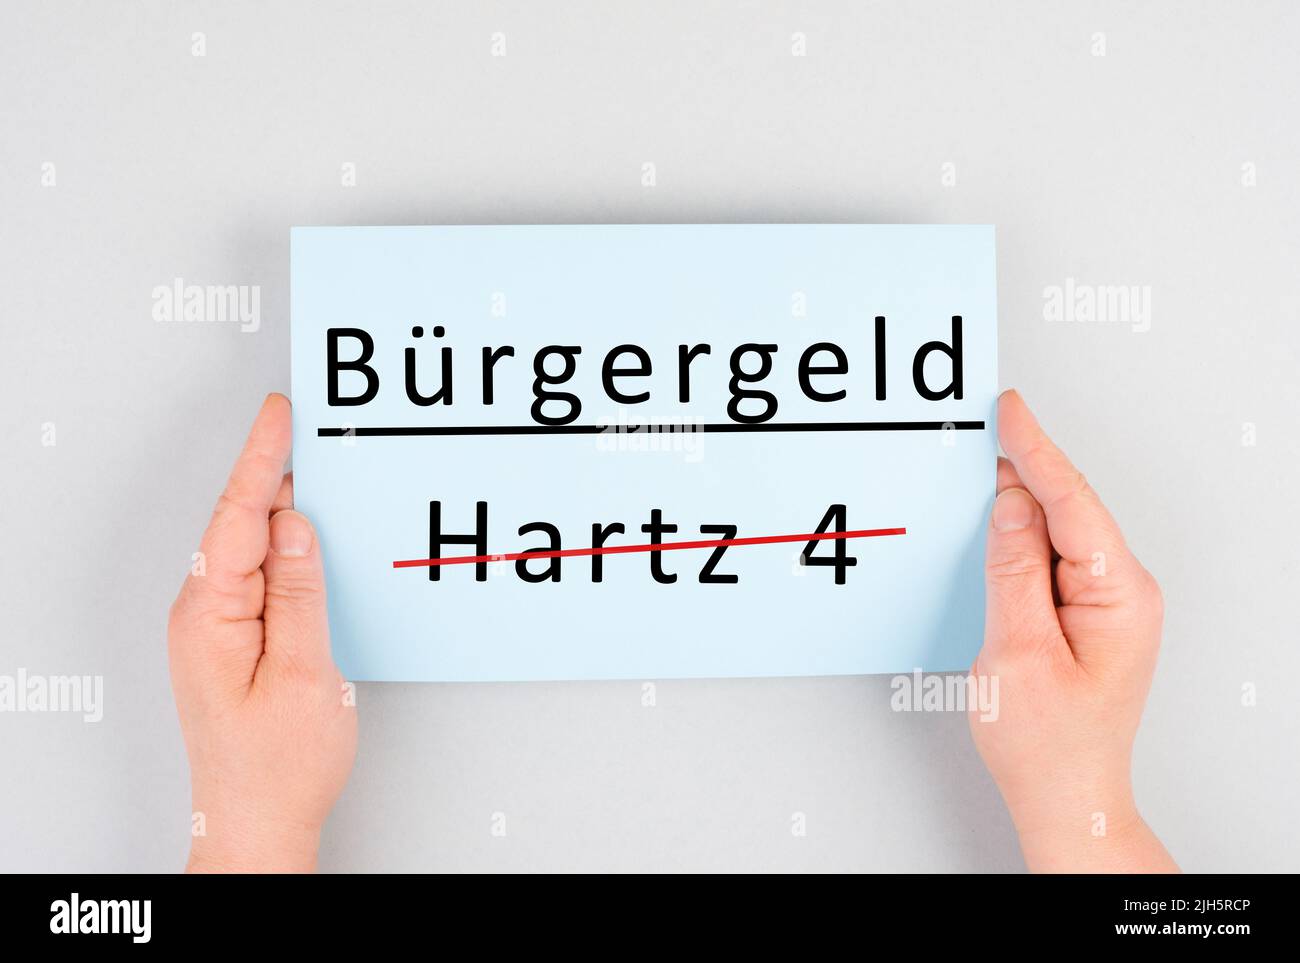 The german word for citizen money is standing on a paper, Hartz 4 is crossed out, new financial help system for unemployment in Germany, social issue Stock Photo